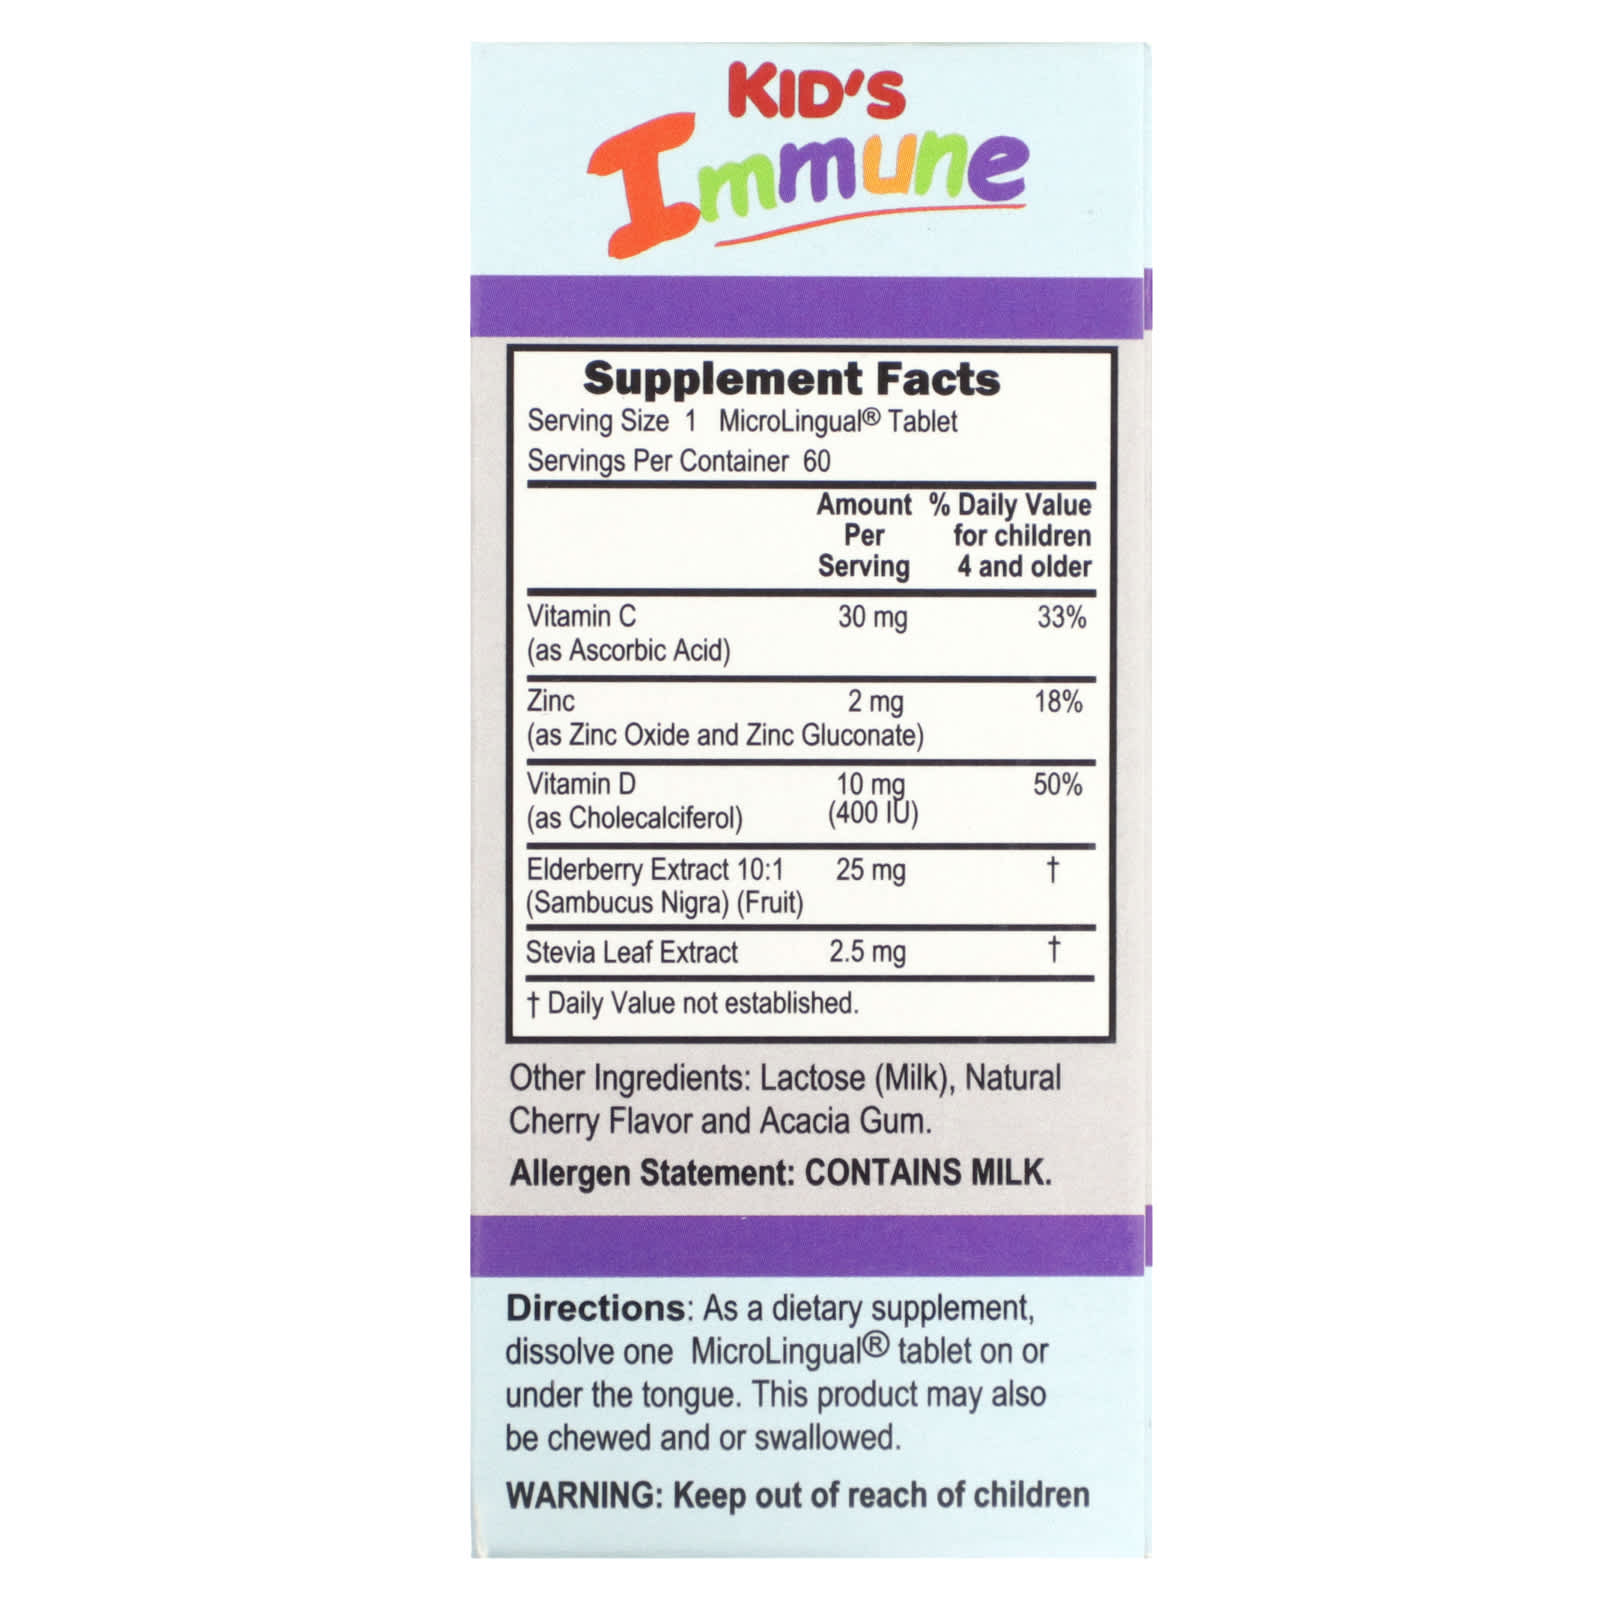 Kid's Immune Clean Melts (60 Tablets)